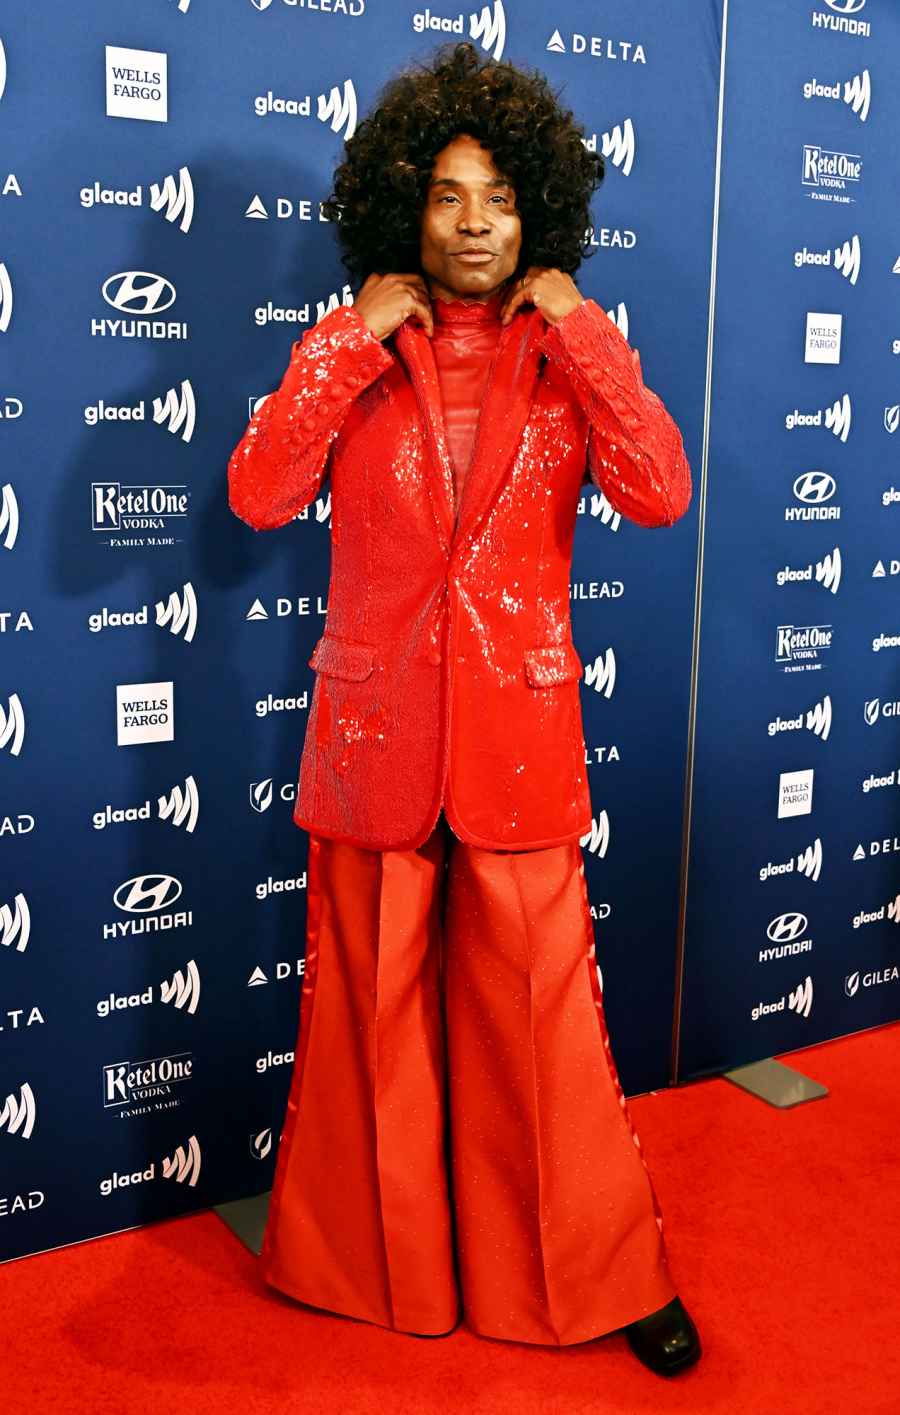 See the Stars at the GLAAD Awards Billy Porter